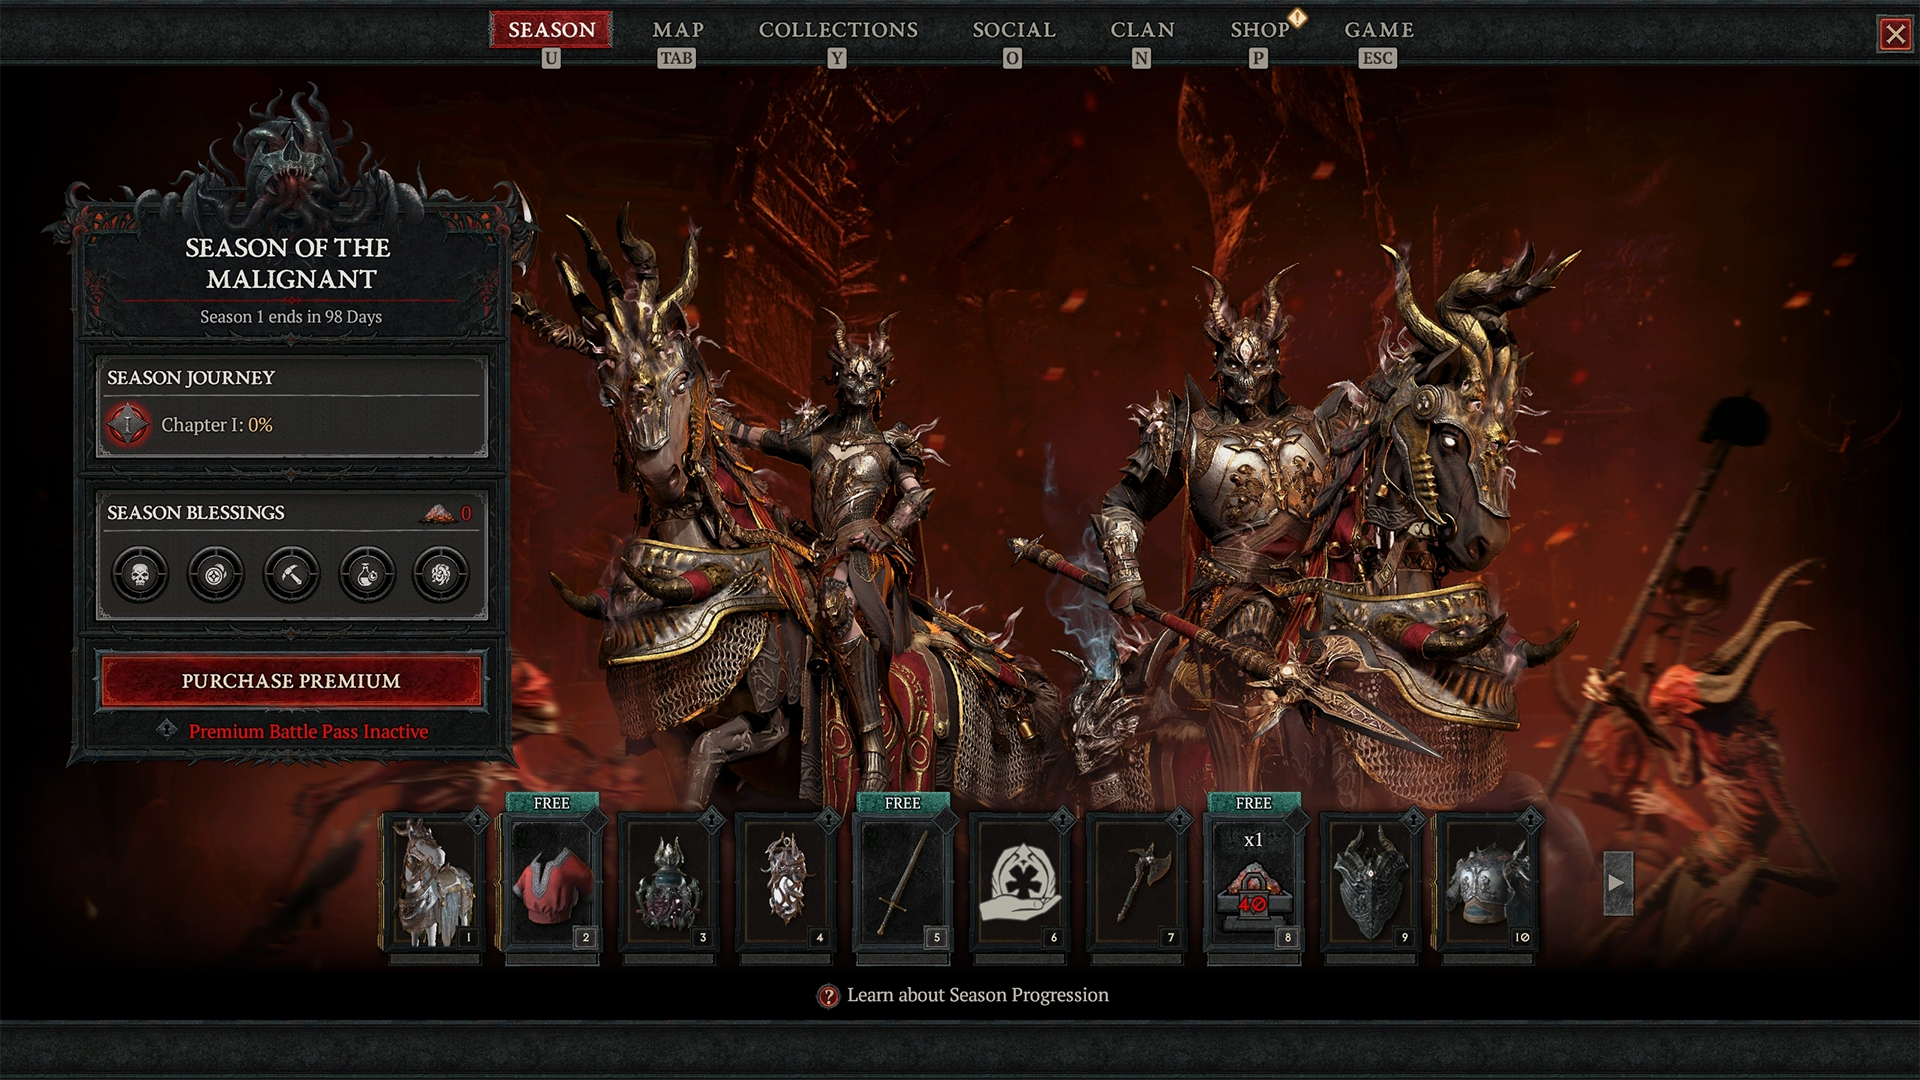 Page one of the Diablo 4 Season of the Malignant season pass, with two demonic horsemen in armor in the background.